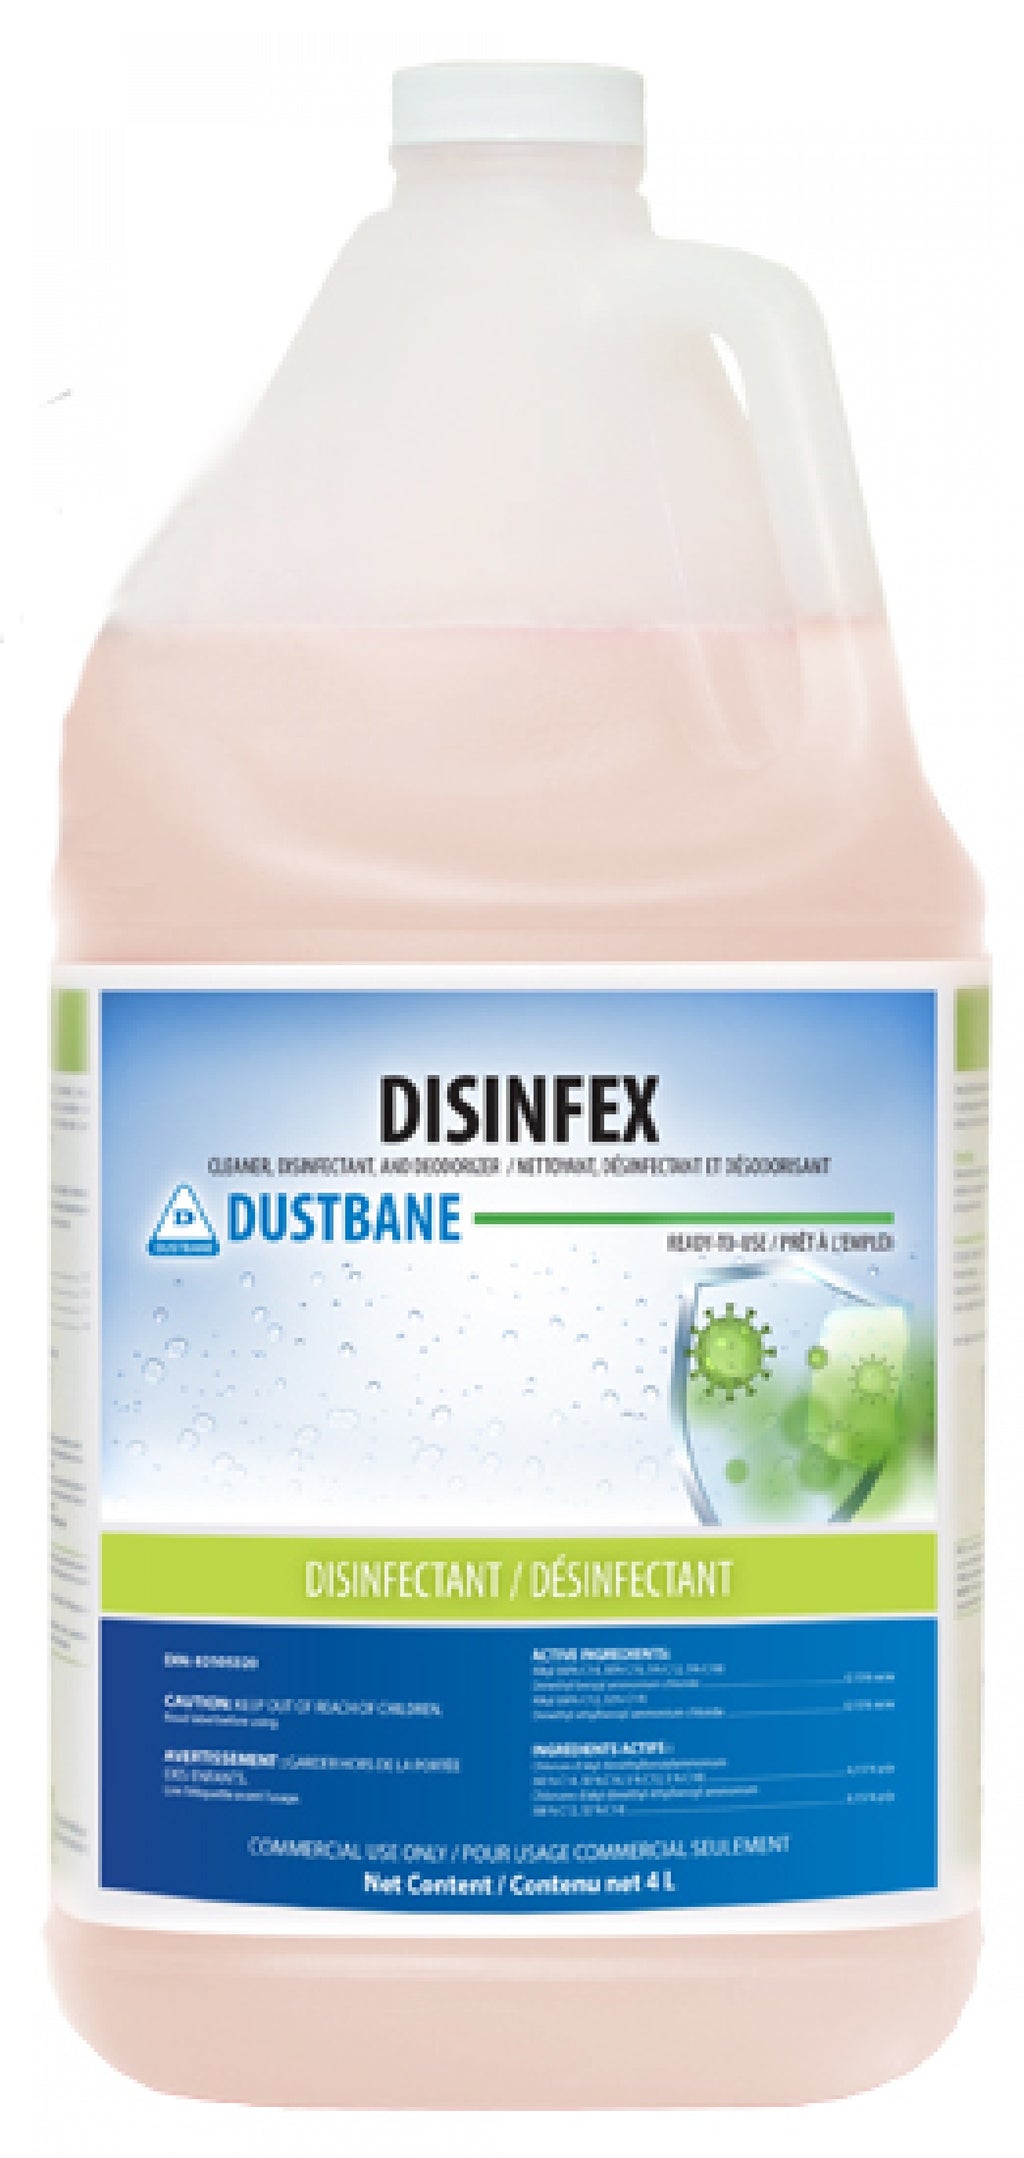 4L DUSTBANE® DISINFEX™ CLEANER, DISINFECTANT AND DEODORIZER, RTU